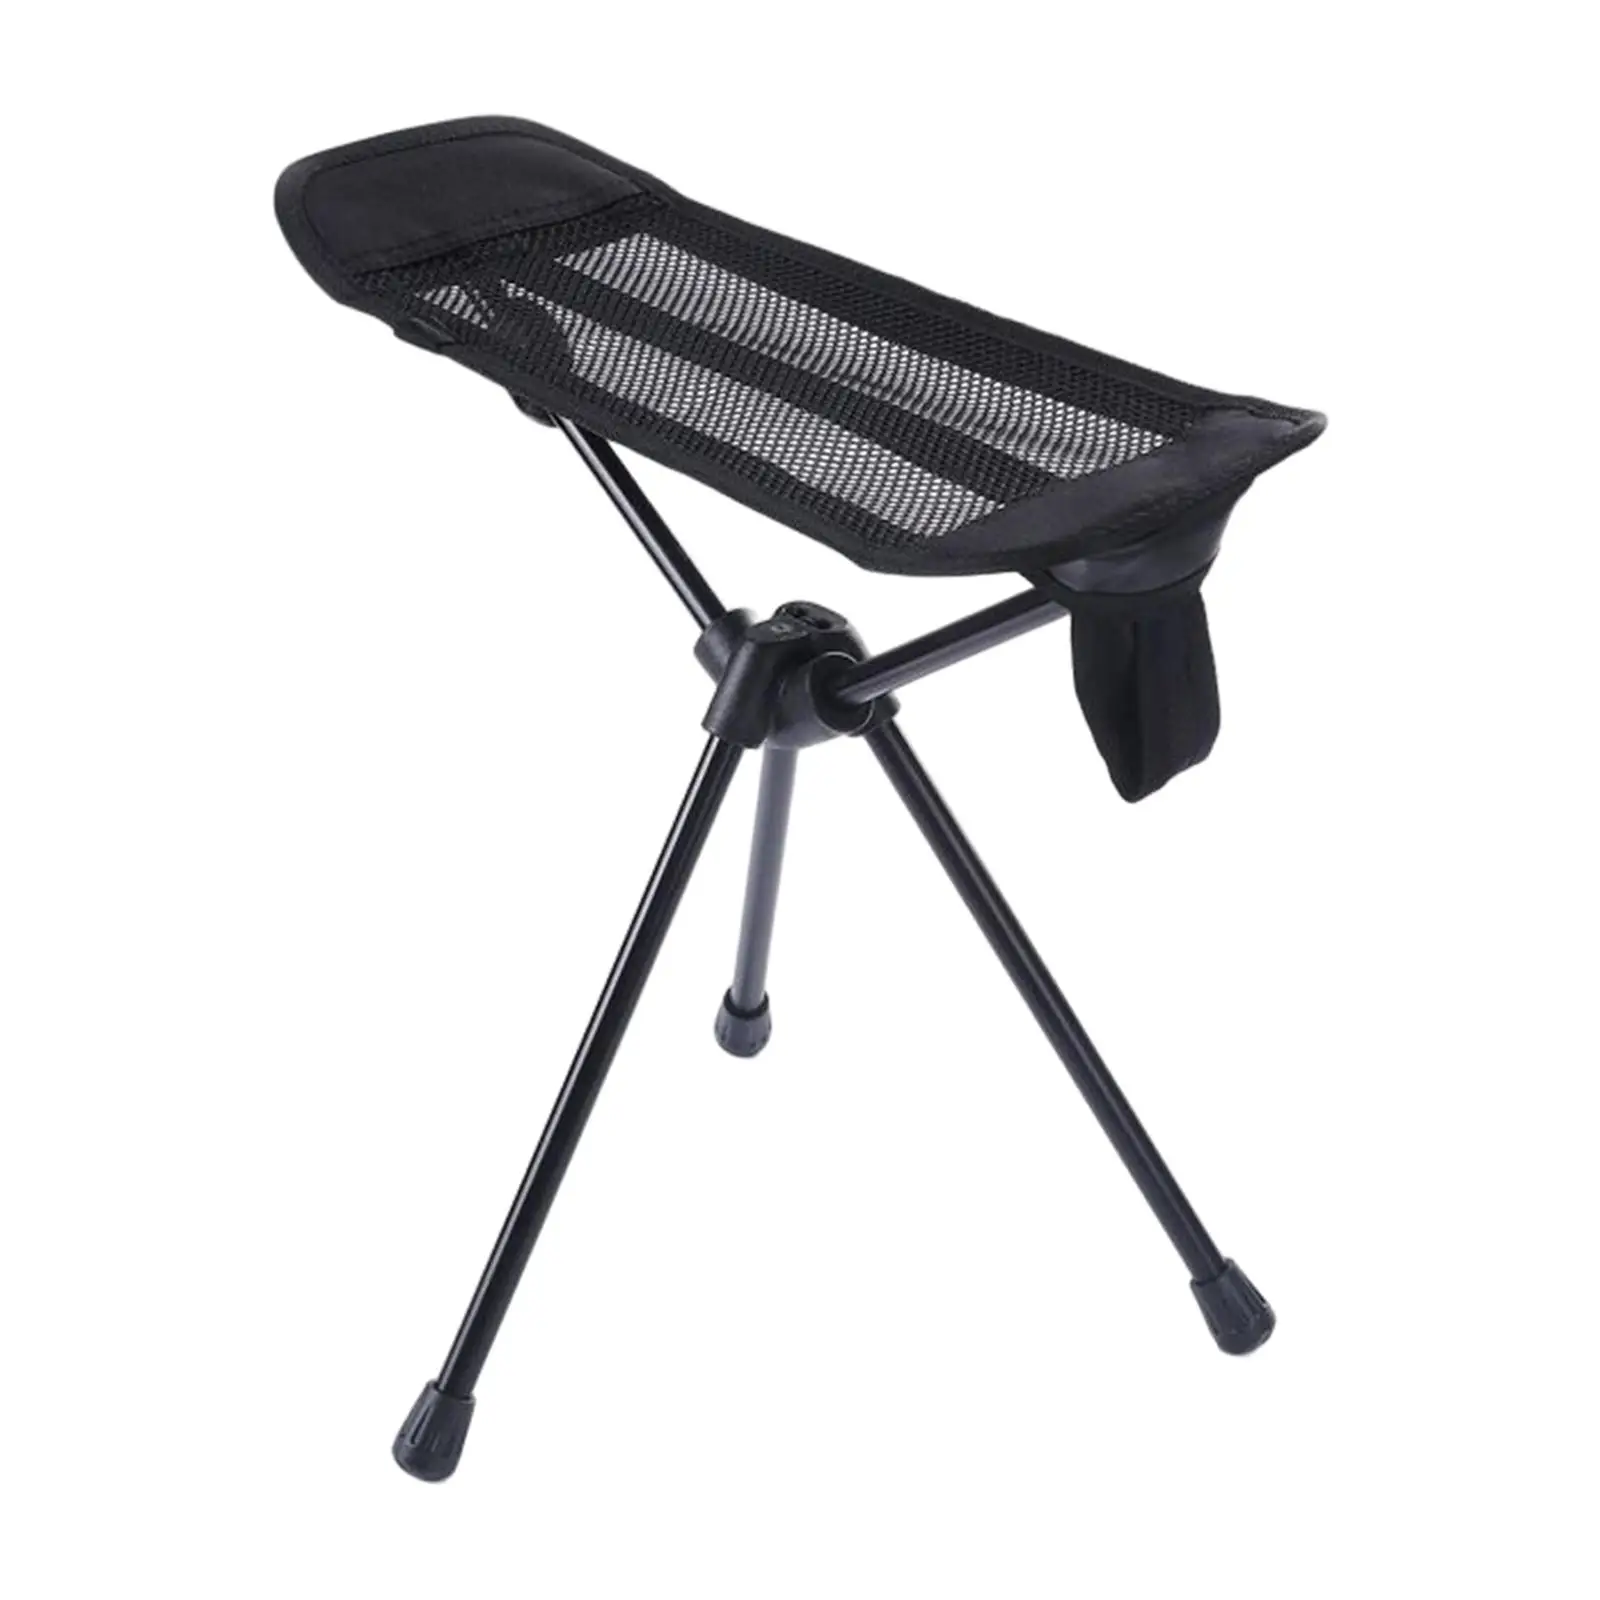 Portable Folding Chair Outdoor Camping Recliner Lazy Retractable Footrest Leg Rest for Hiking Fishing Picnic